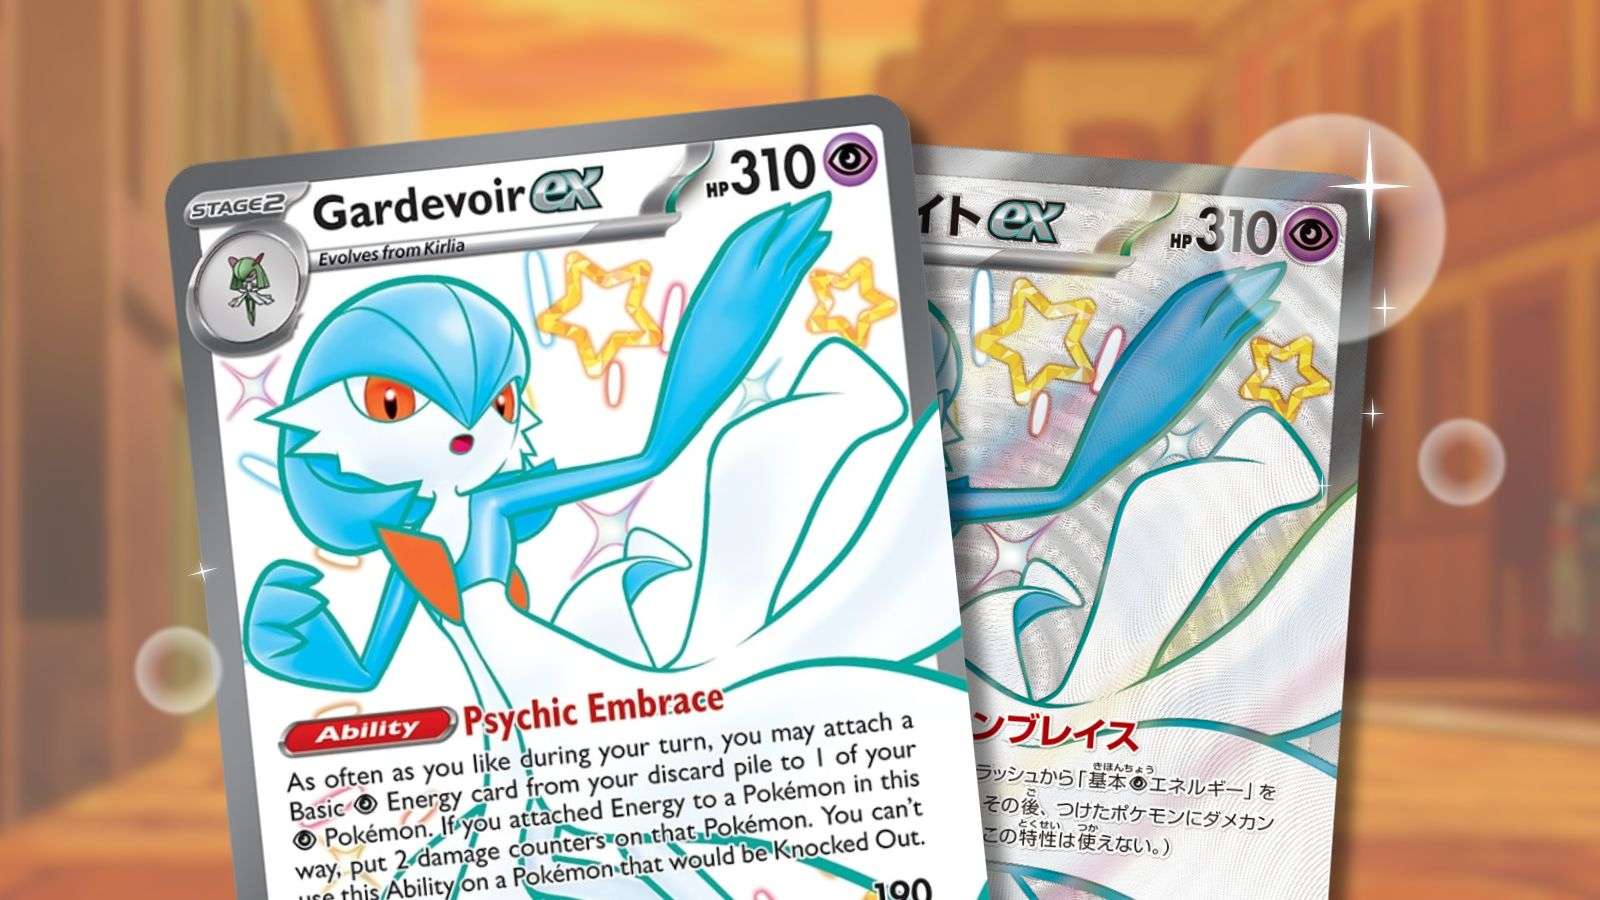 Gardevoir Pokemon cards (one in English and one in Japanese) with anime background and sparkles.